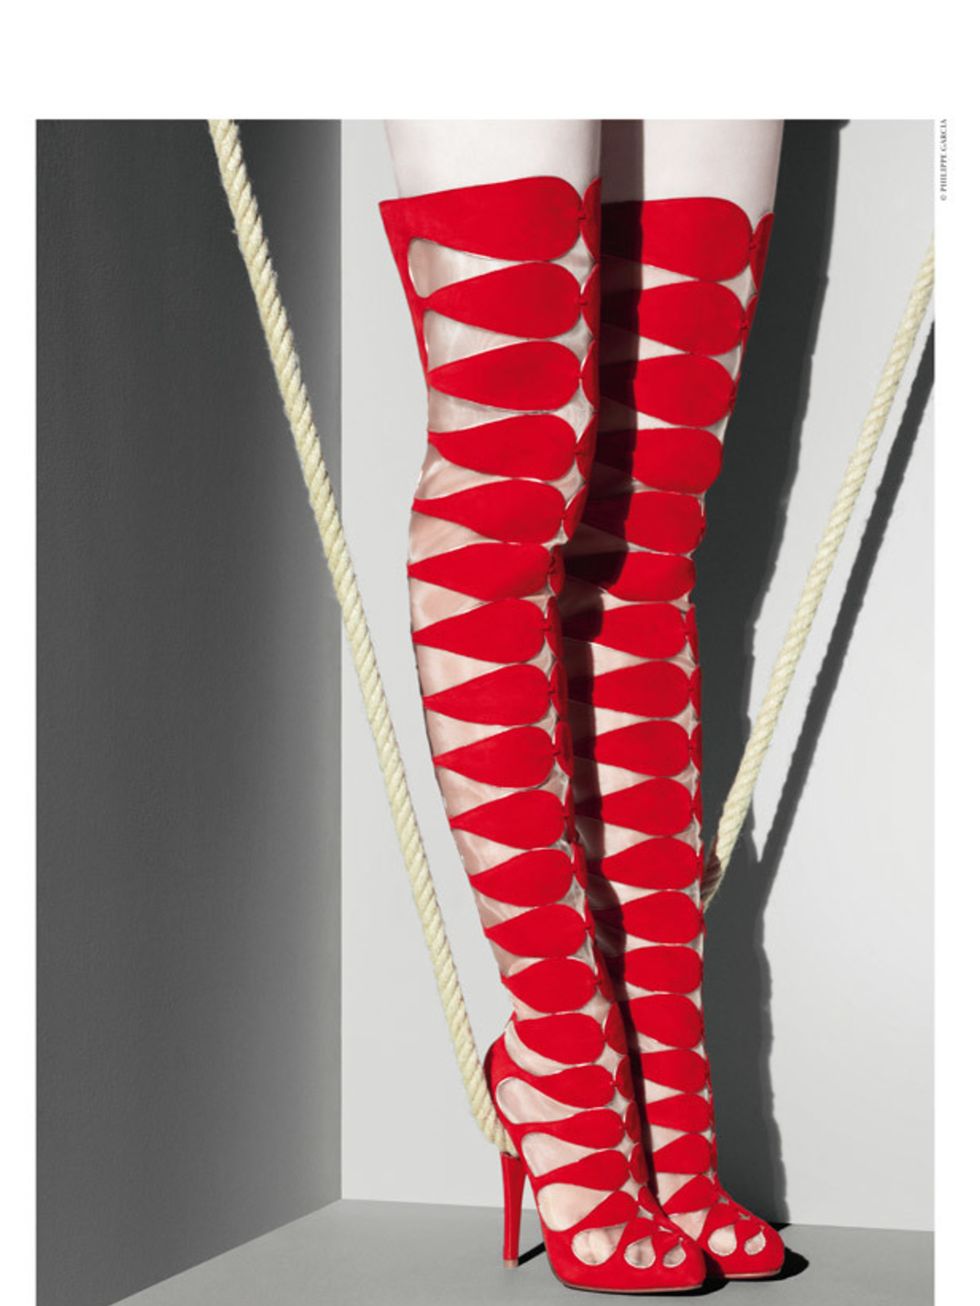 <p>Christian Louboutin is one saucy 20-year-old. As the brand that makes everyone see red (soles) enters its third decade, its looking back with a<a href="http://www.elleuk.com/news/fashion-news/louboutin-to-put-his-footprint-on-design-museum"> retrospec